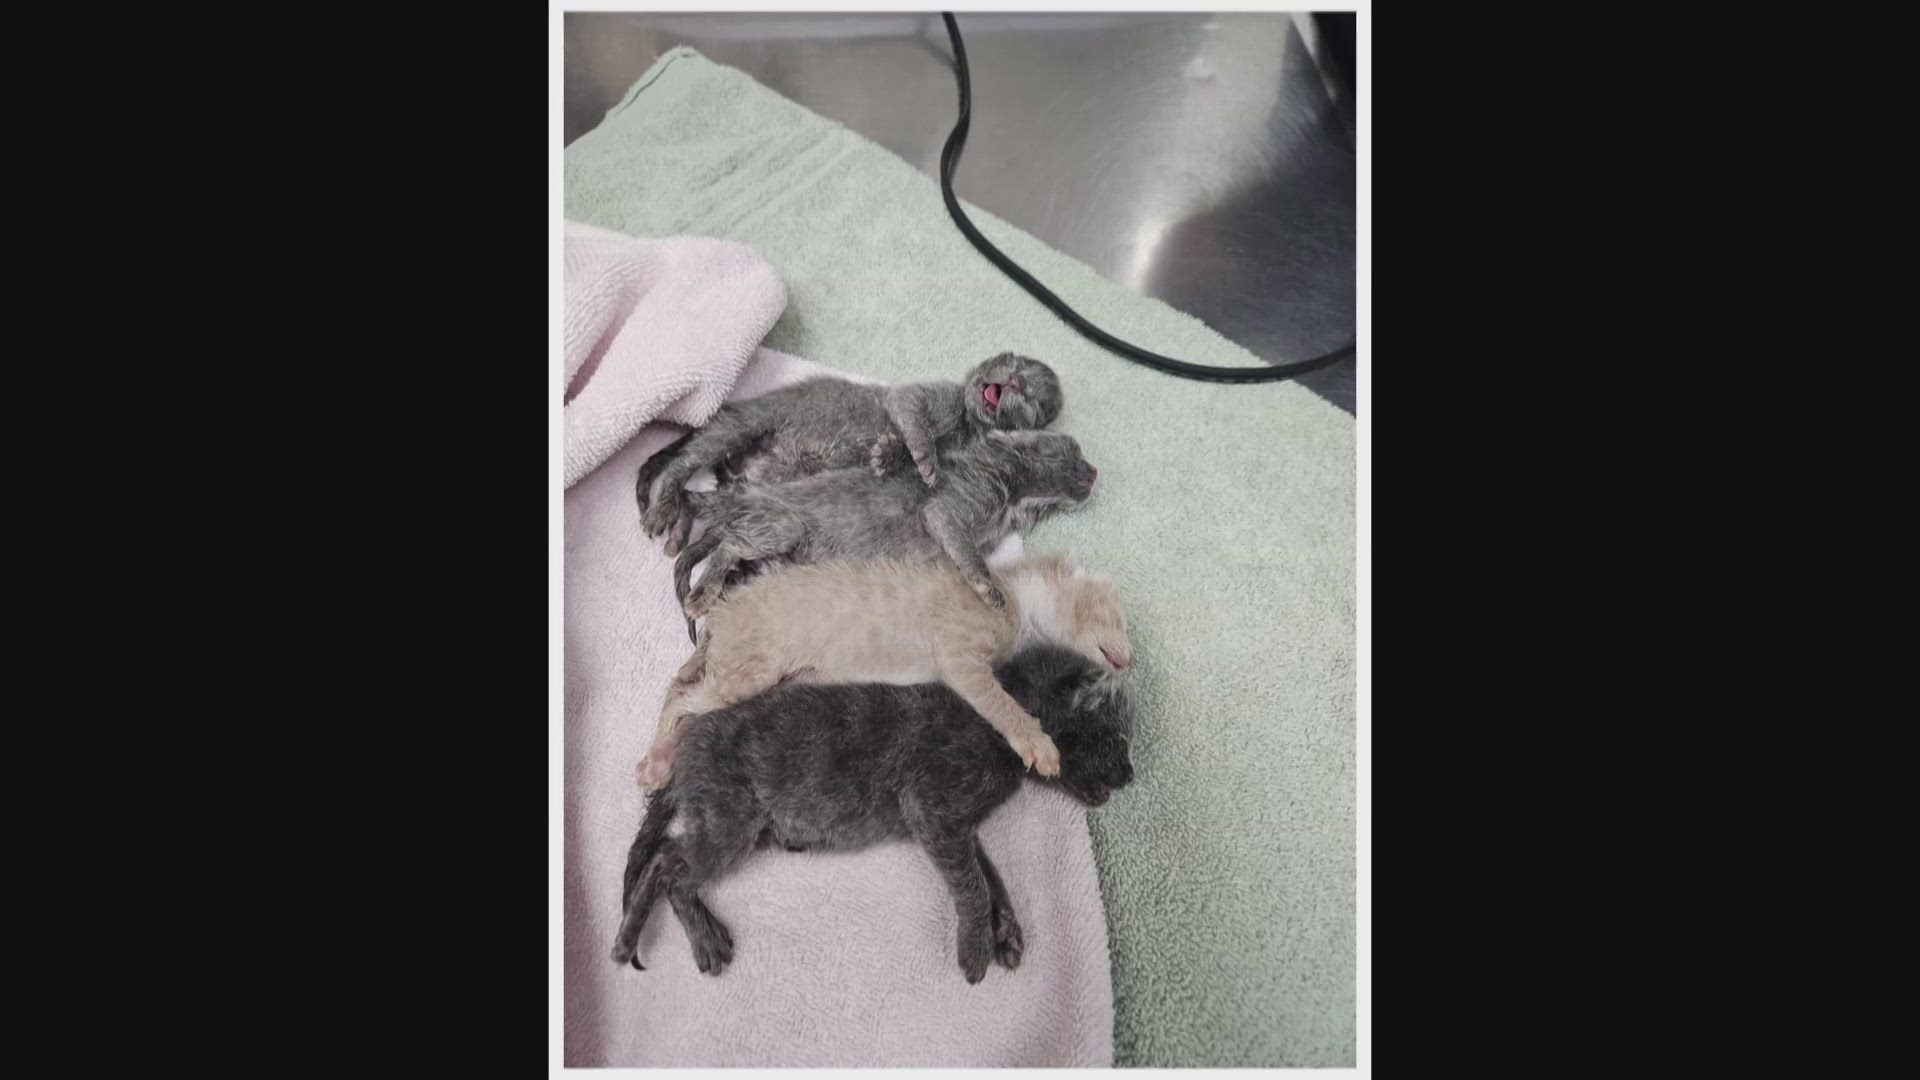 Despite the veterinarian team's best efforts, one kitten did not make it. The four surviving kittens will require a lot of time to get healthy enough for adoption.